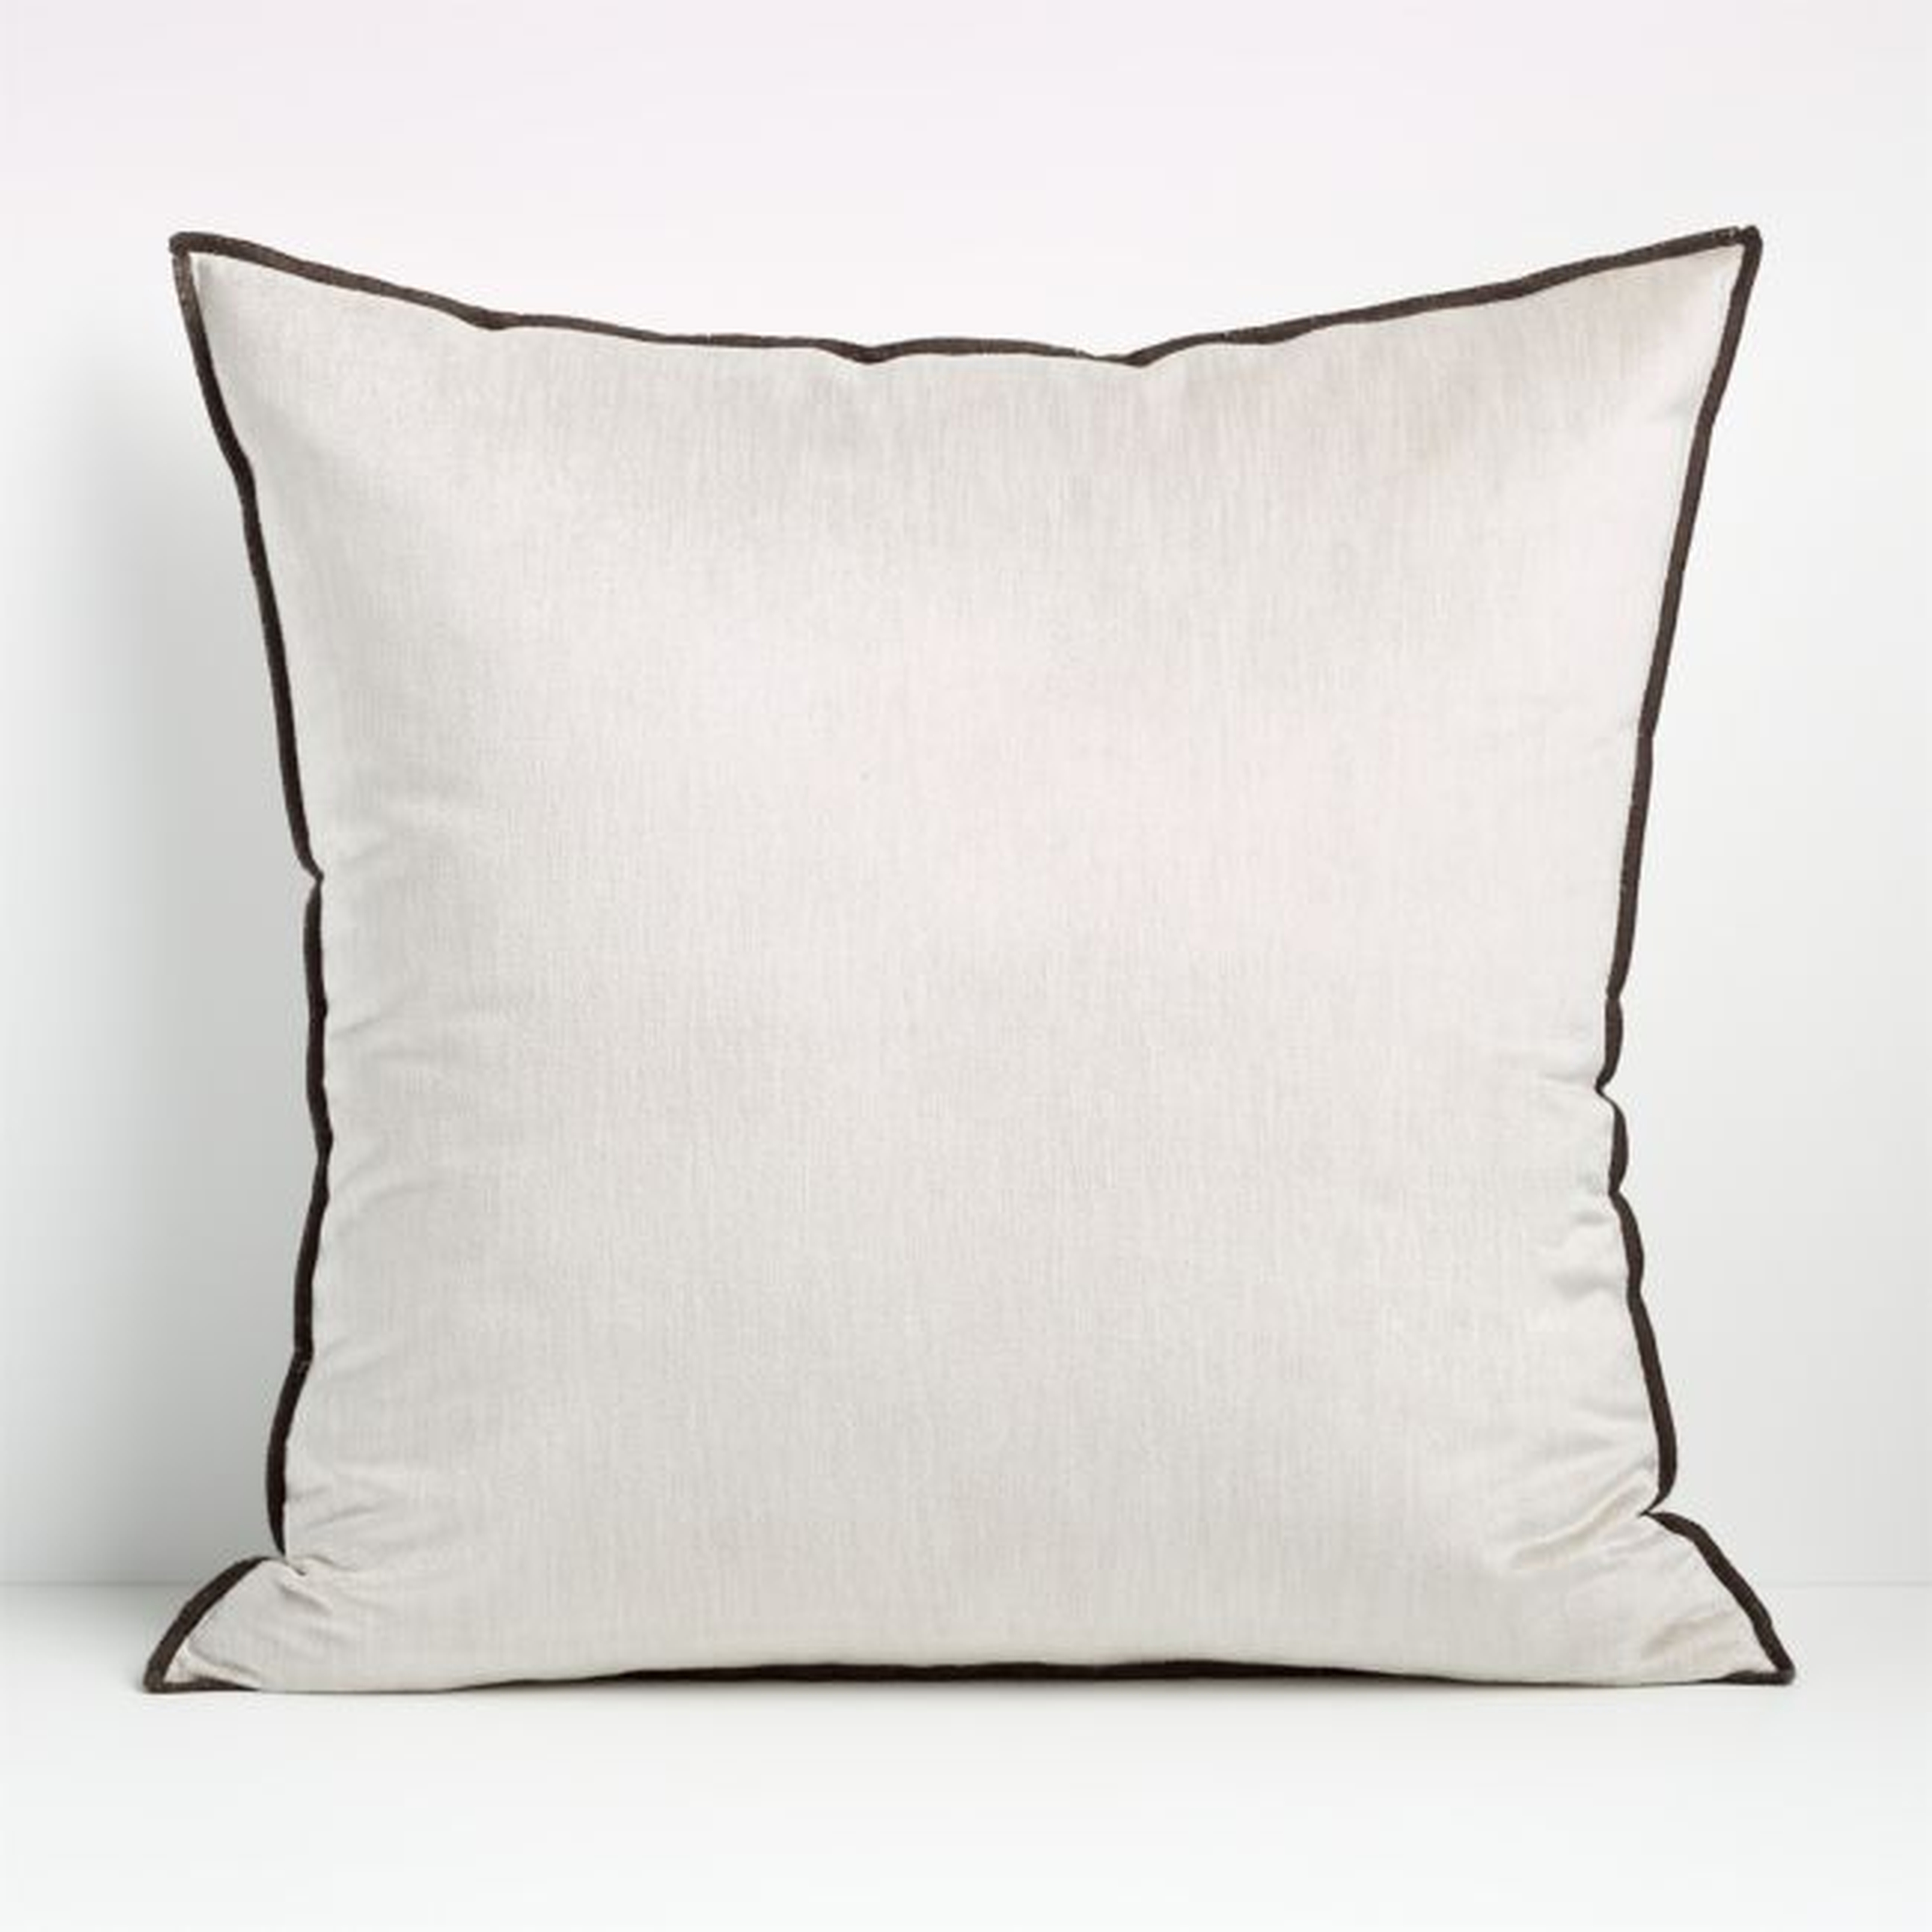 Styria Moonbeam 23" Pillow Cover - Crate and Barrel